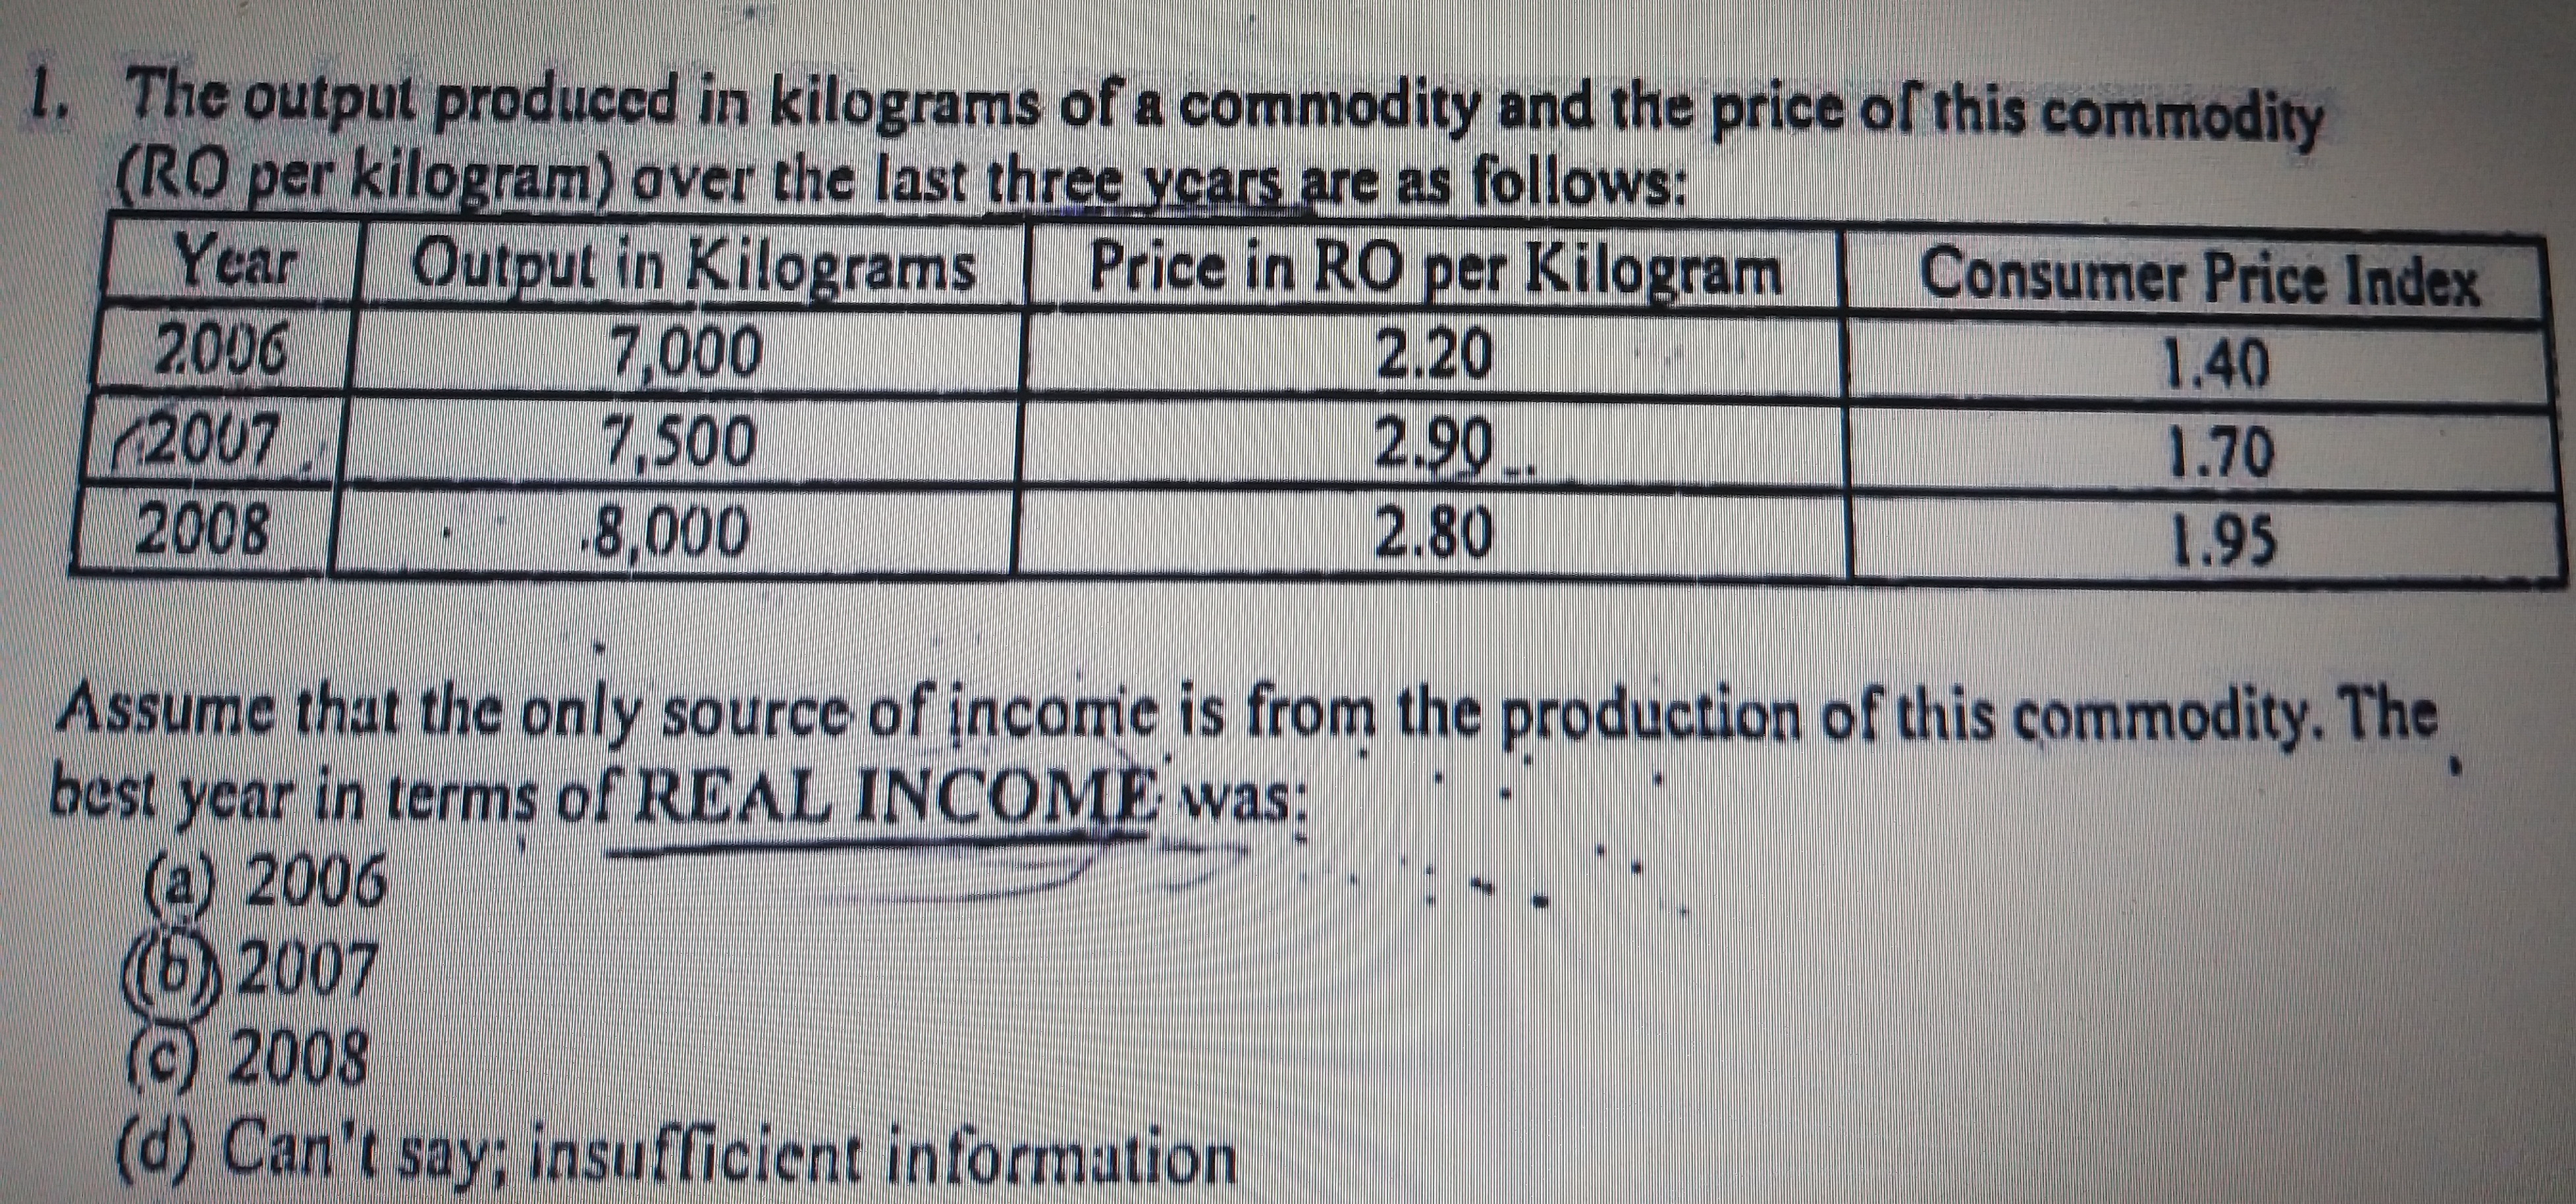 The output produced in kilograms of a commodity and the price of this commodity
(RO per kilogram) over the last three ycars are as follows:
